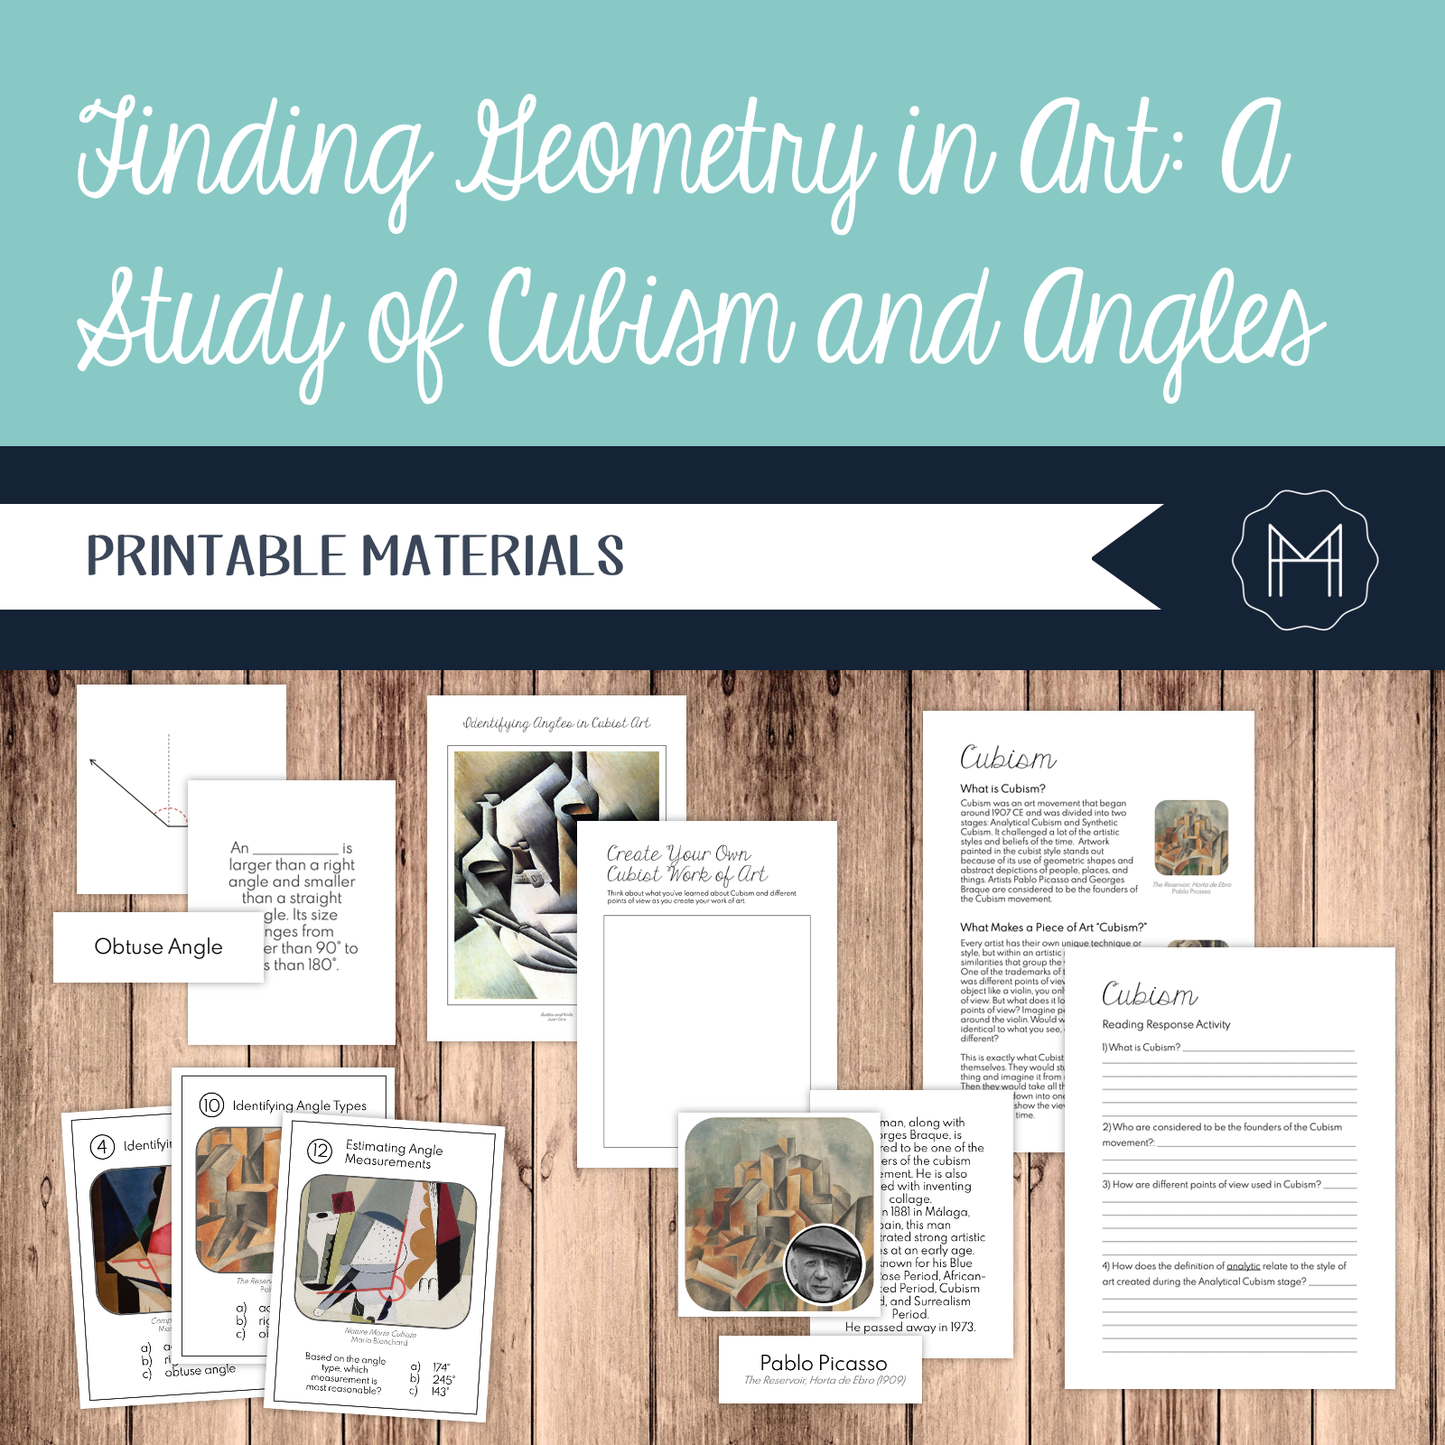 Finding Geometry in Art: A Study of Cubism